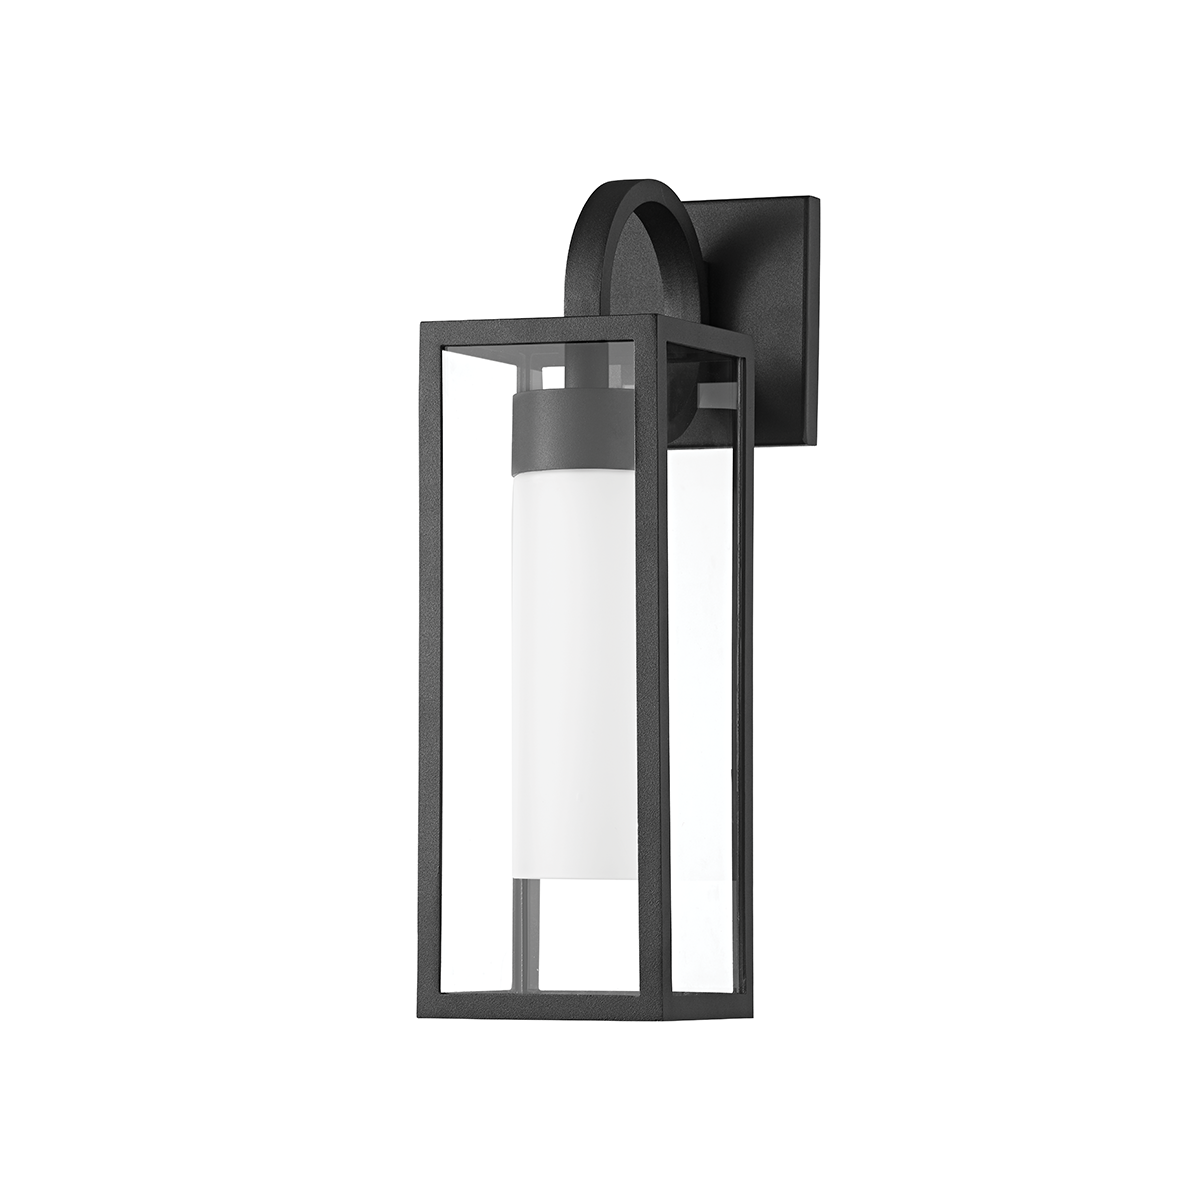 Troy Lighting 1 LIGHT SMALL EXTERIOR WALL SCONCE B6911